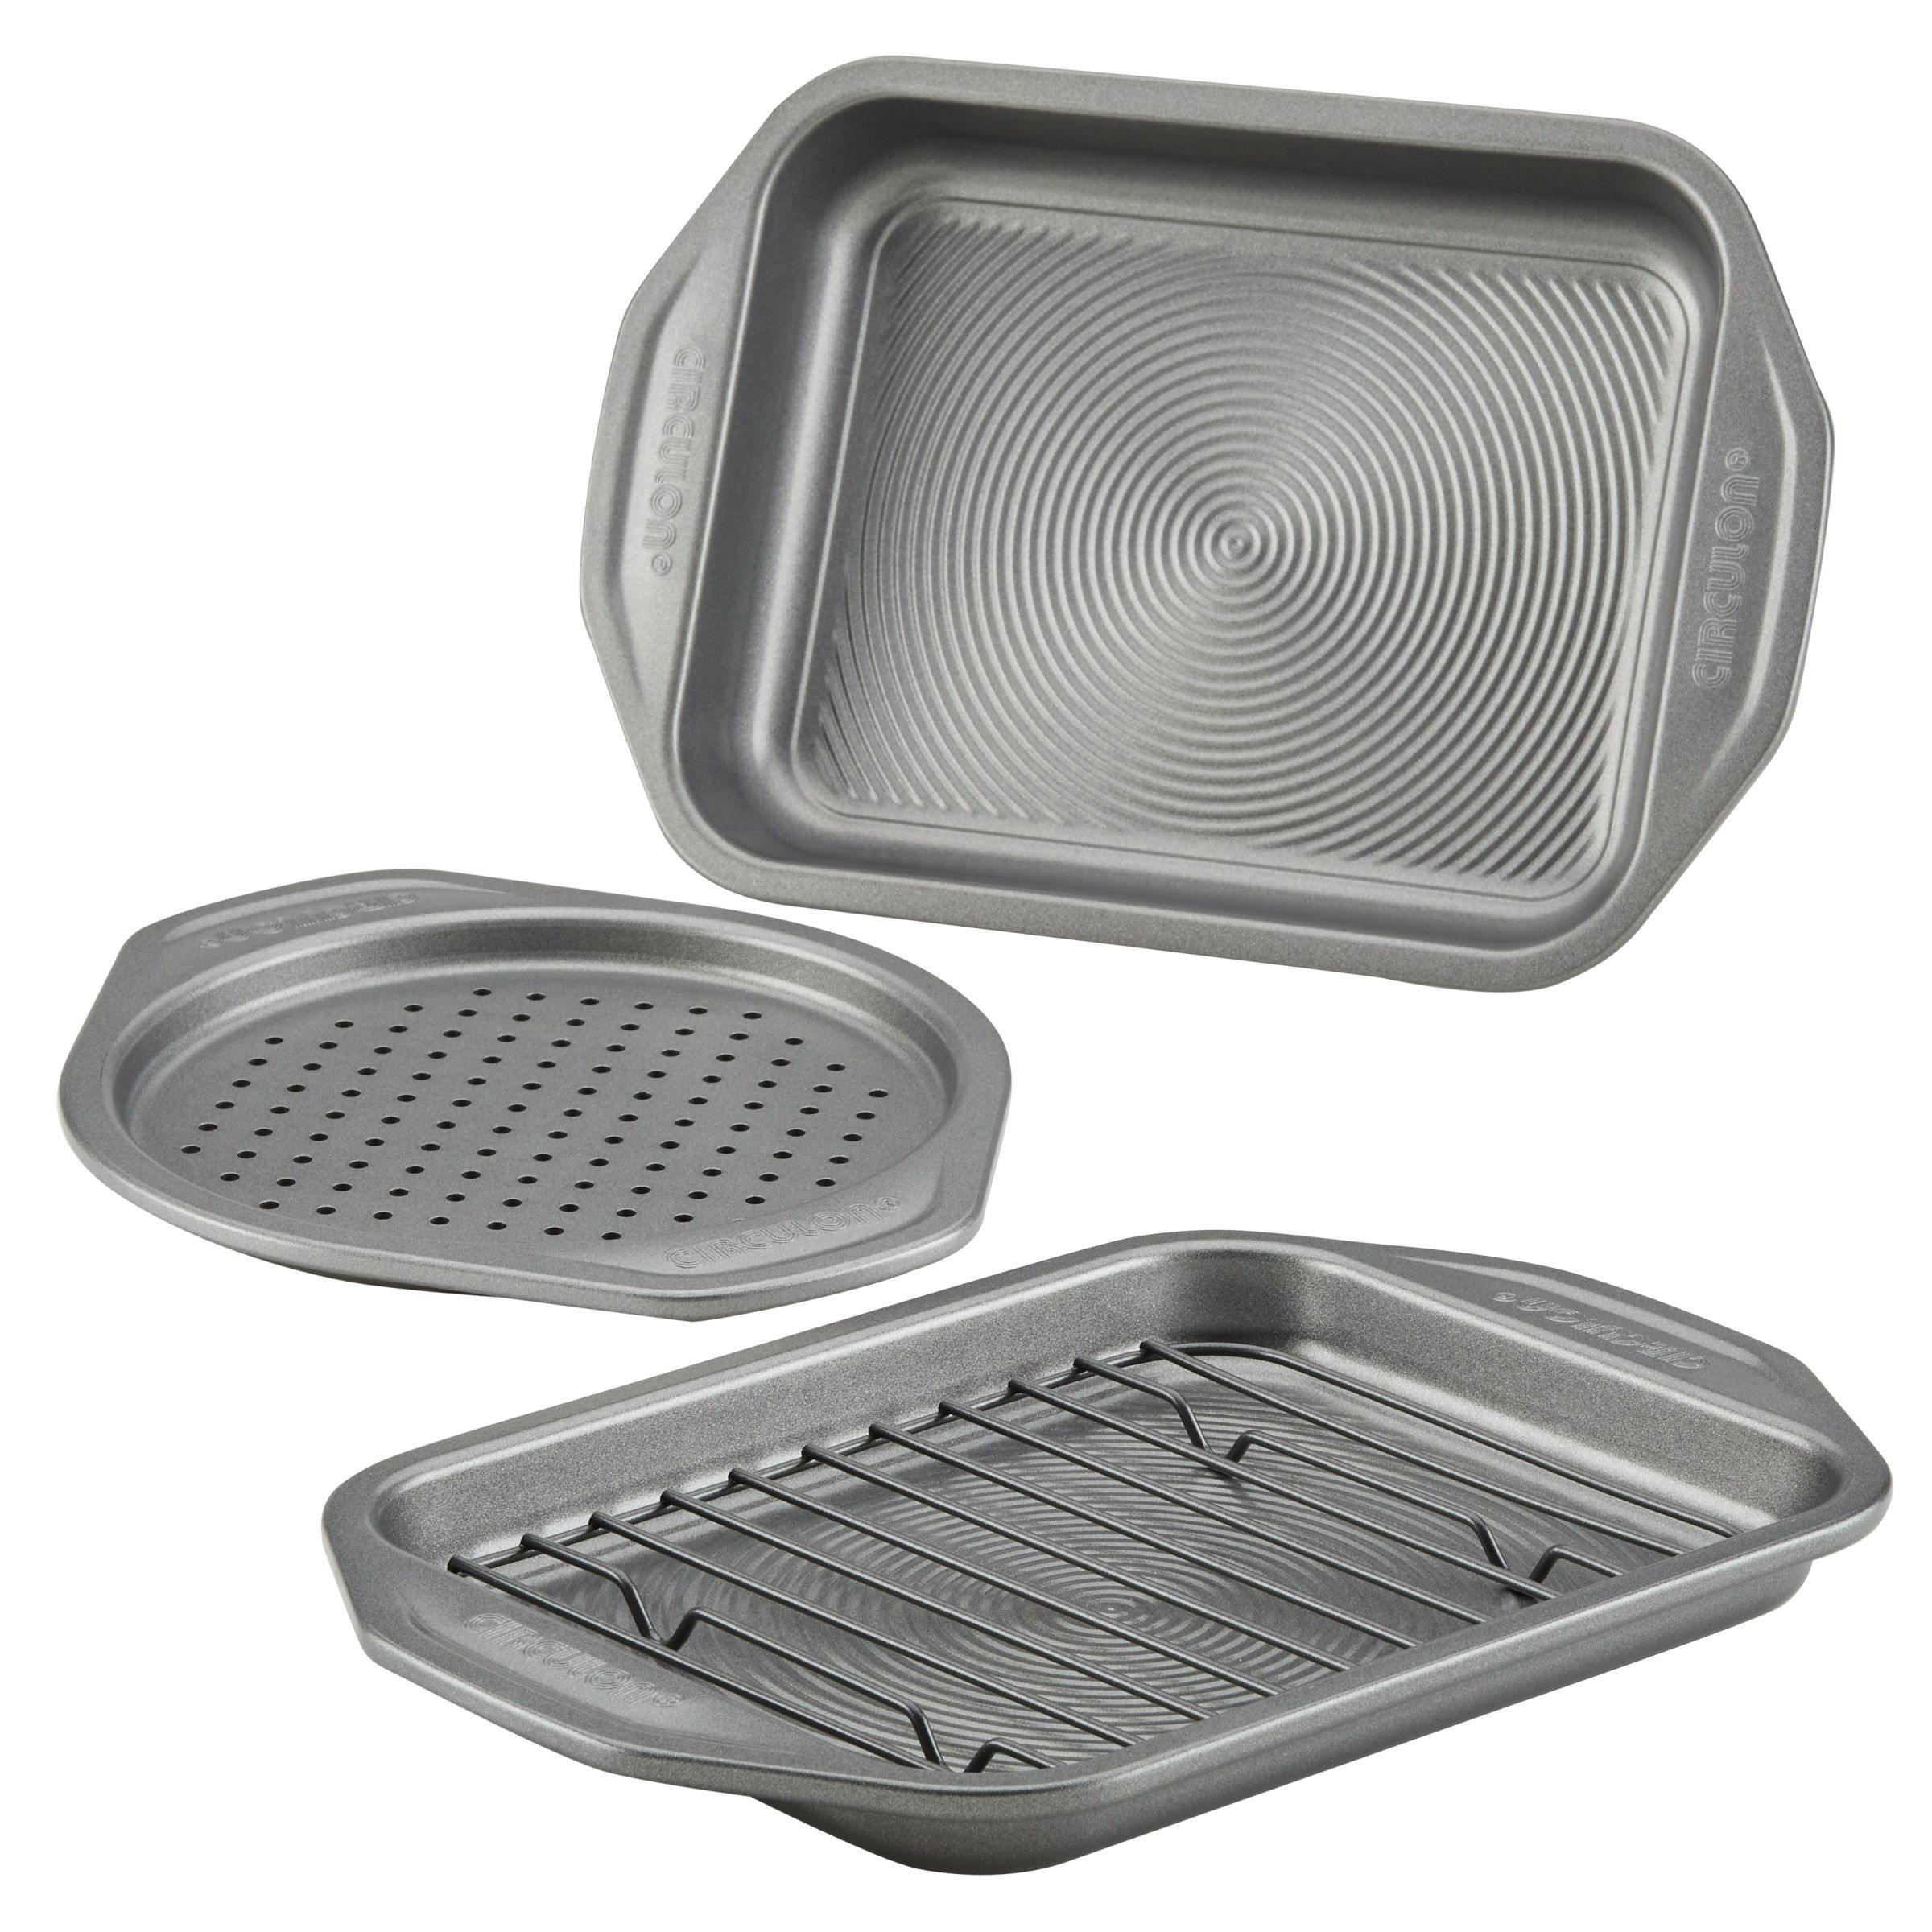 Circulon Total Bakeware Nonstick Toaster Oven and Personal Pizza Pan Baking Set, 4-Piece, Gray